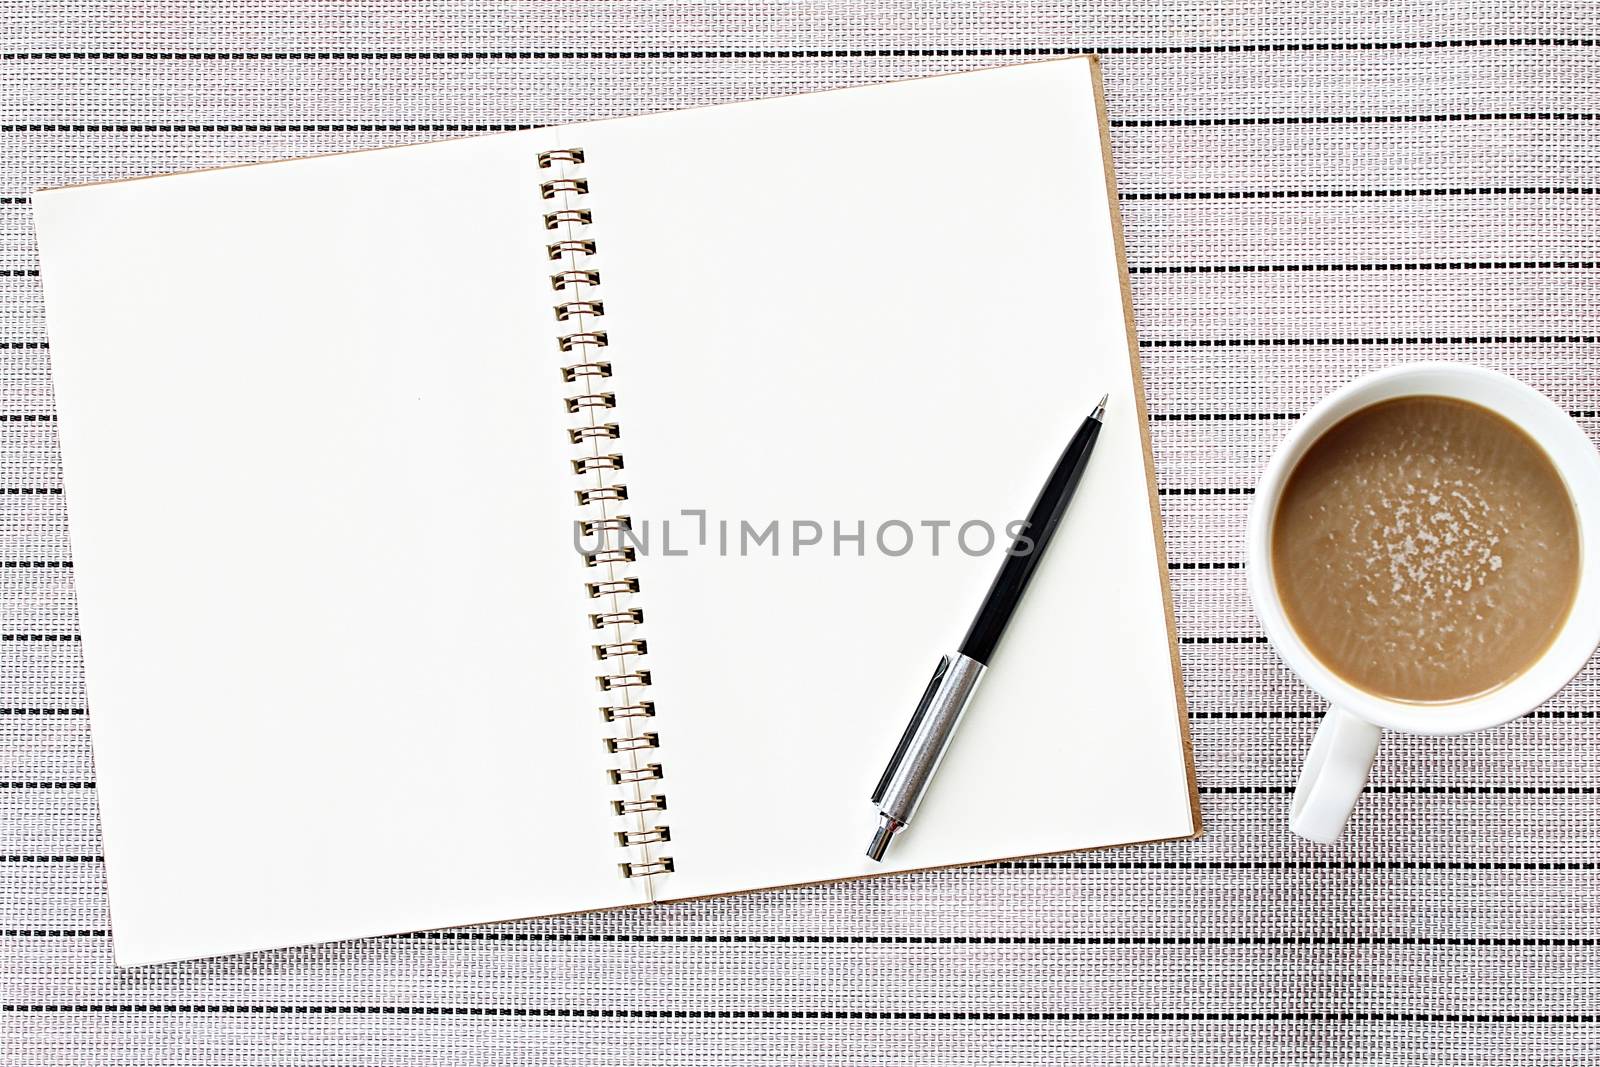 Business, still life, education, office supplies or planning concept : Top view or flat lay image of open notebook with blank pages and coffee cup on table background, ready for adding or mock up